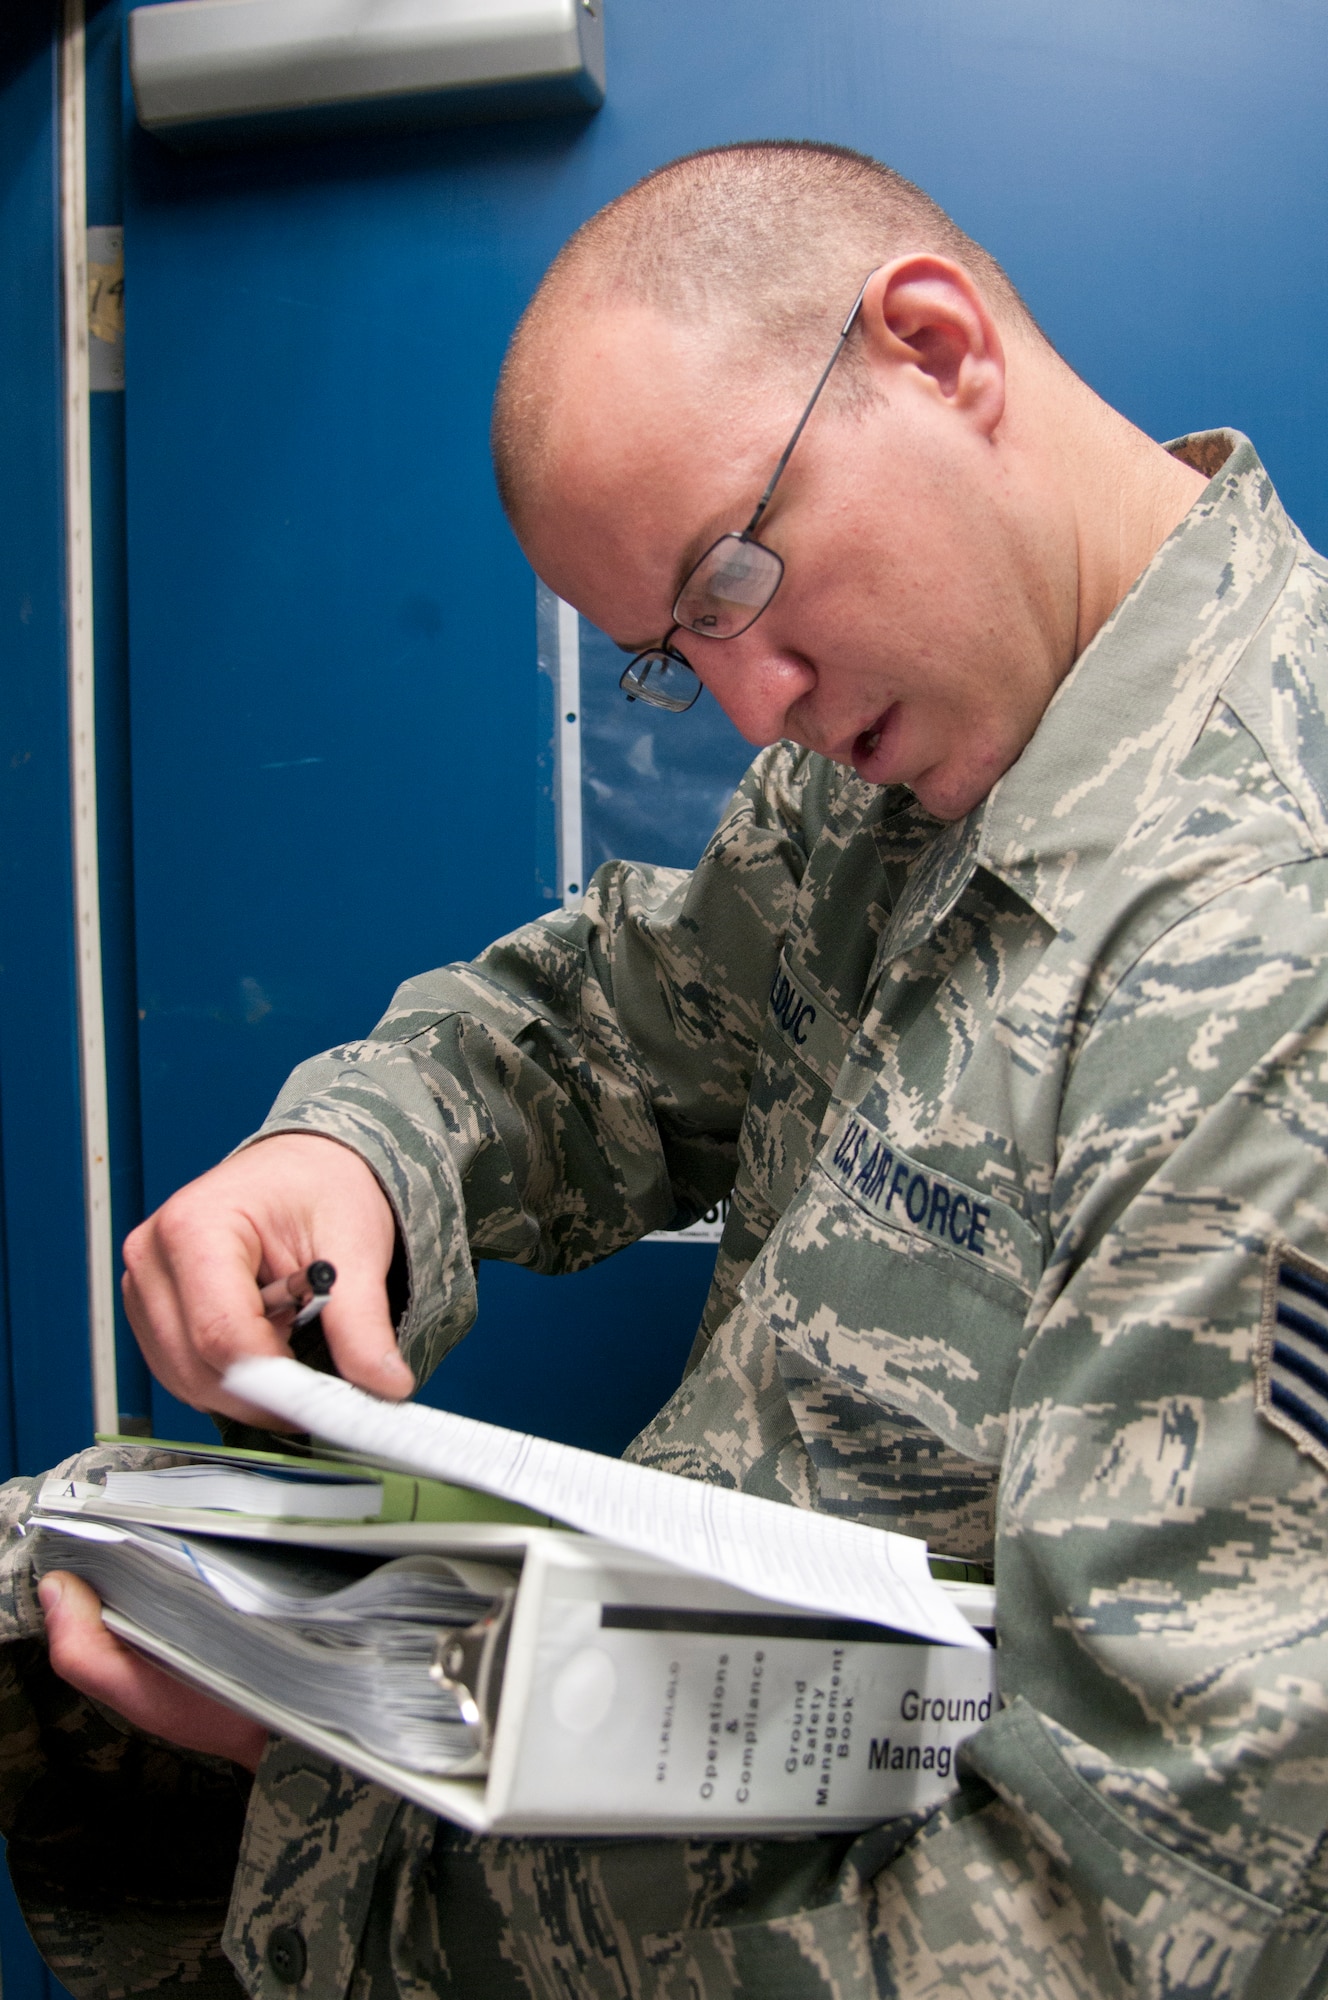 Staff Sgt. Philip Bolduc, 90th Logistics Readiness Squadron vehicle maintenance customer service NCOIC and safety representative, reviews his notes in the vehicle maintenance building June 4, 2014, during the squadron’s annual safety inspection. This was Bolduc’s first safety inspection as the safety representative. (U.S. Air Force photo by Airman 1st Class Malcolm Mayfield)